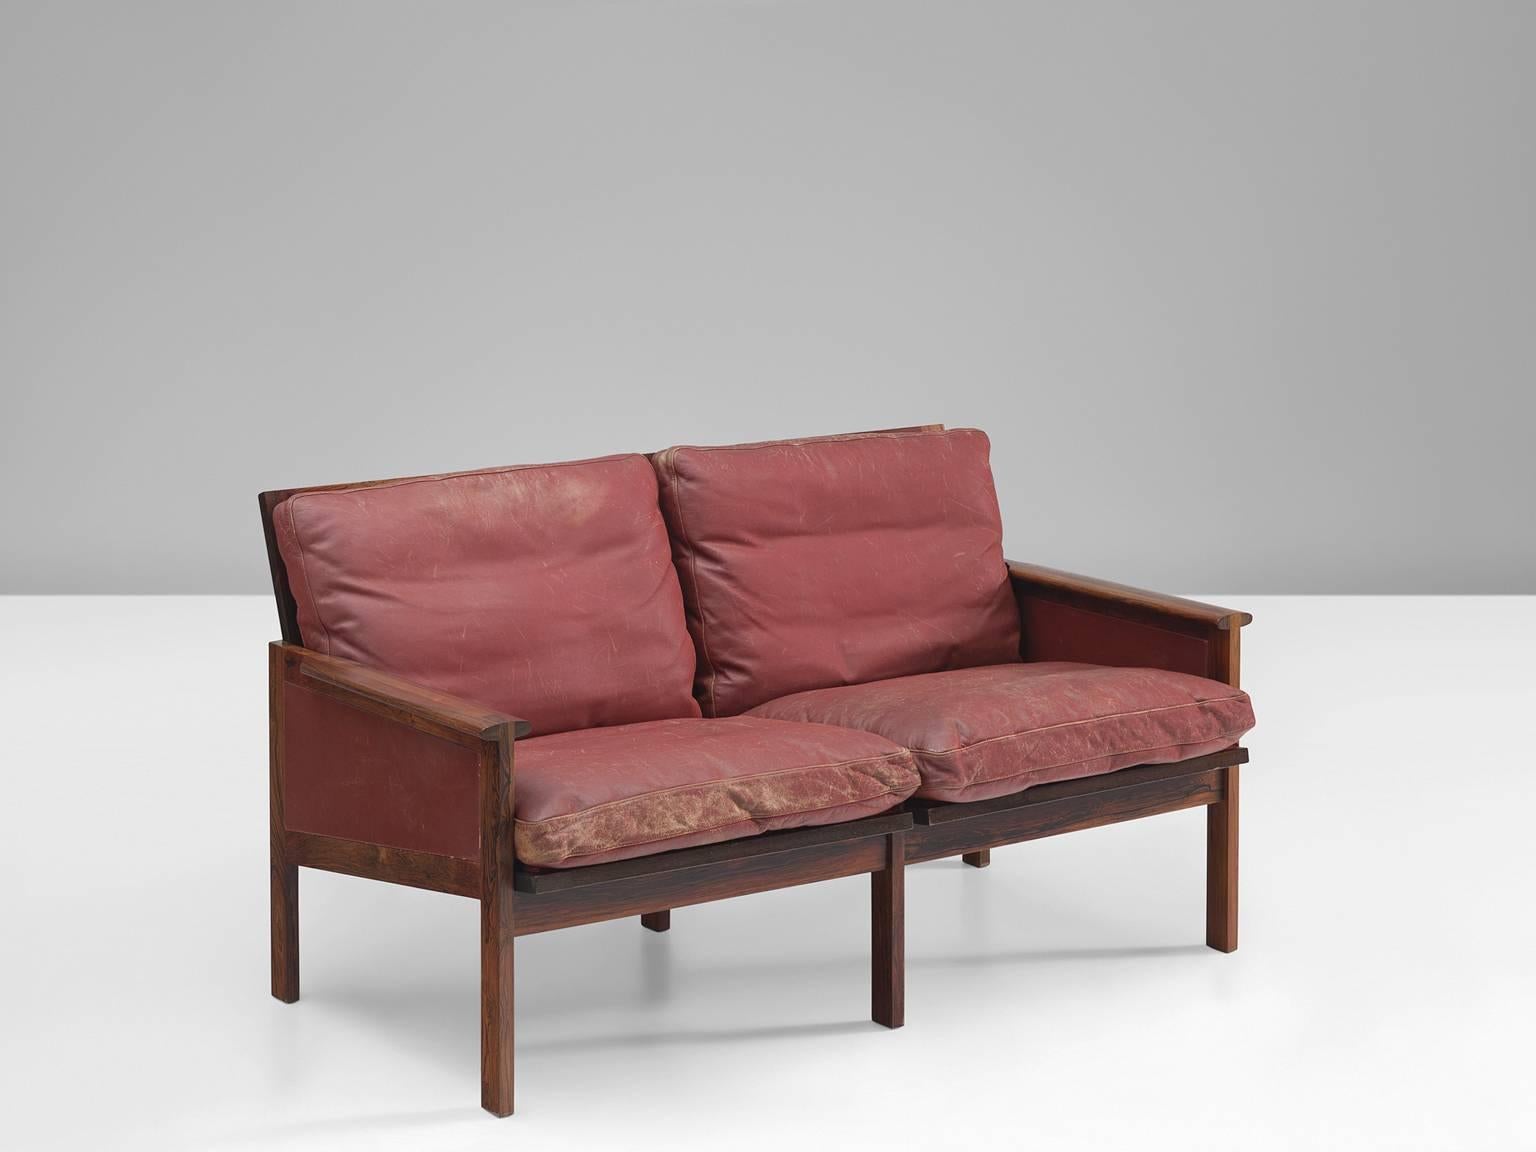 Illum Wikkelsø for N. Eilersen, two-seat sofa, red leather, rosewood, designed by Denmark, 1959.

This strong little sofa is one of the Classic designs by the Dane Illum Wikkelsø. The angular rosewood frame has six legs and and open back featuring